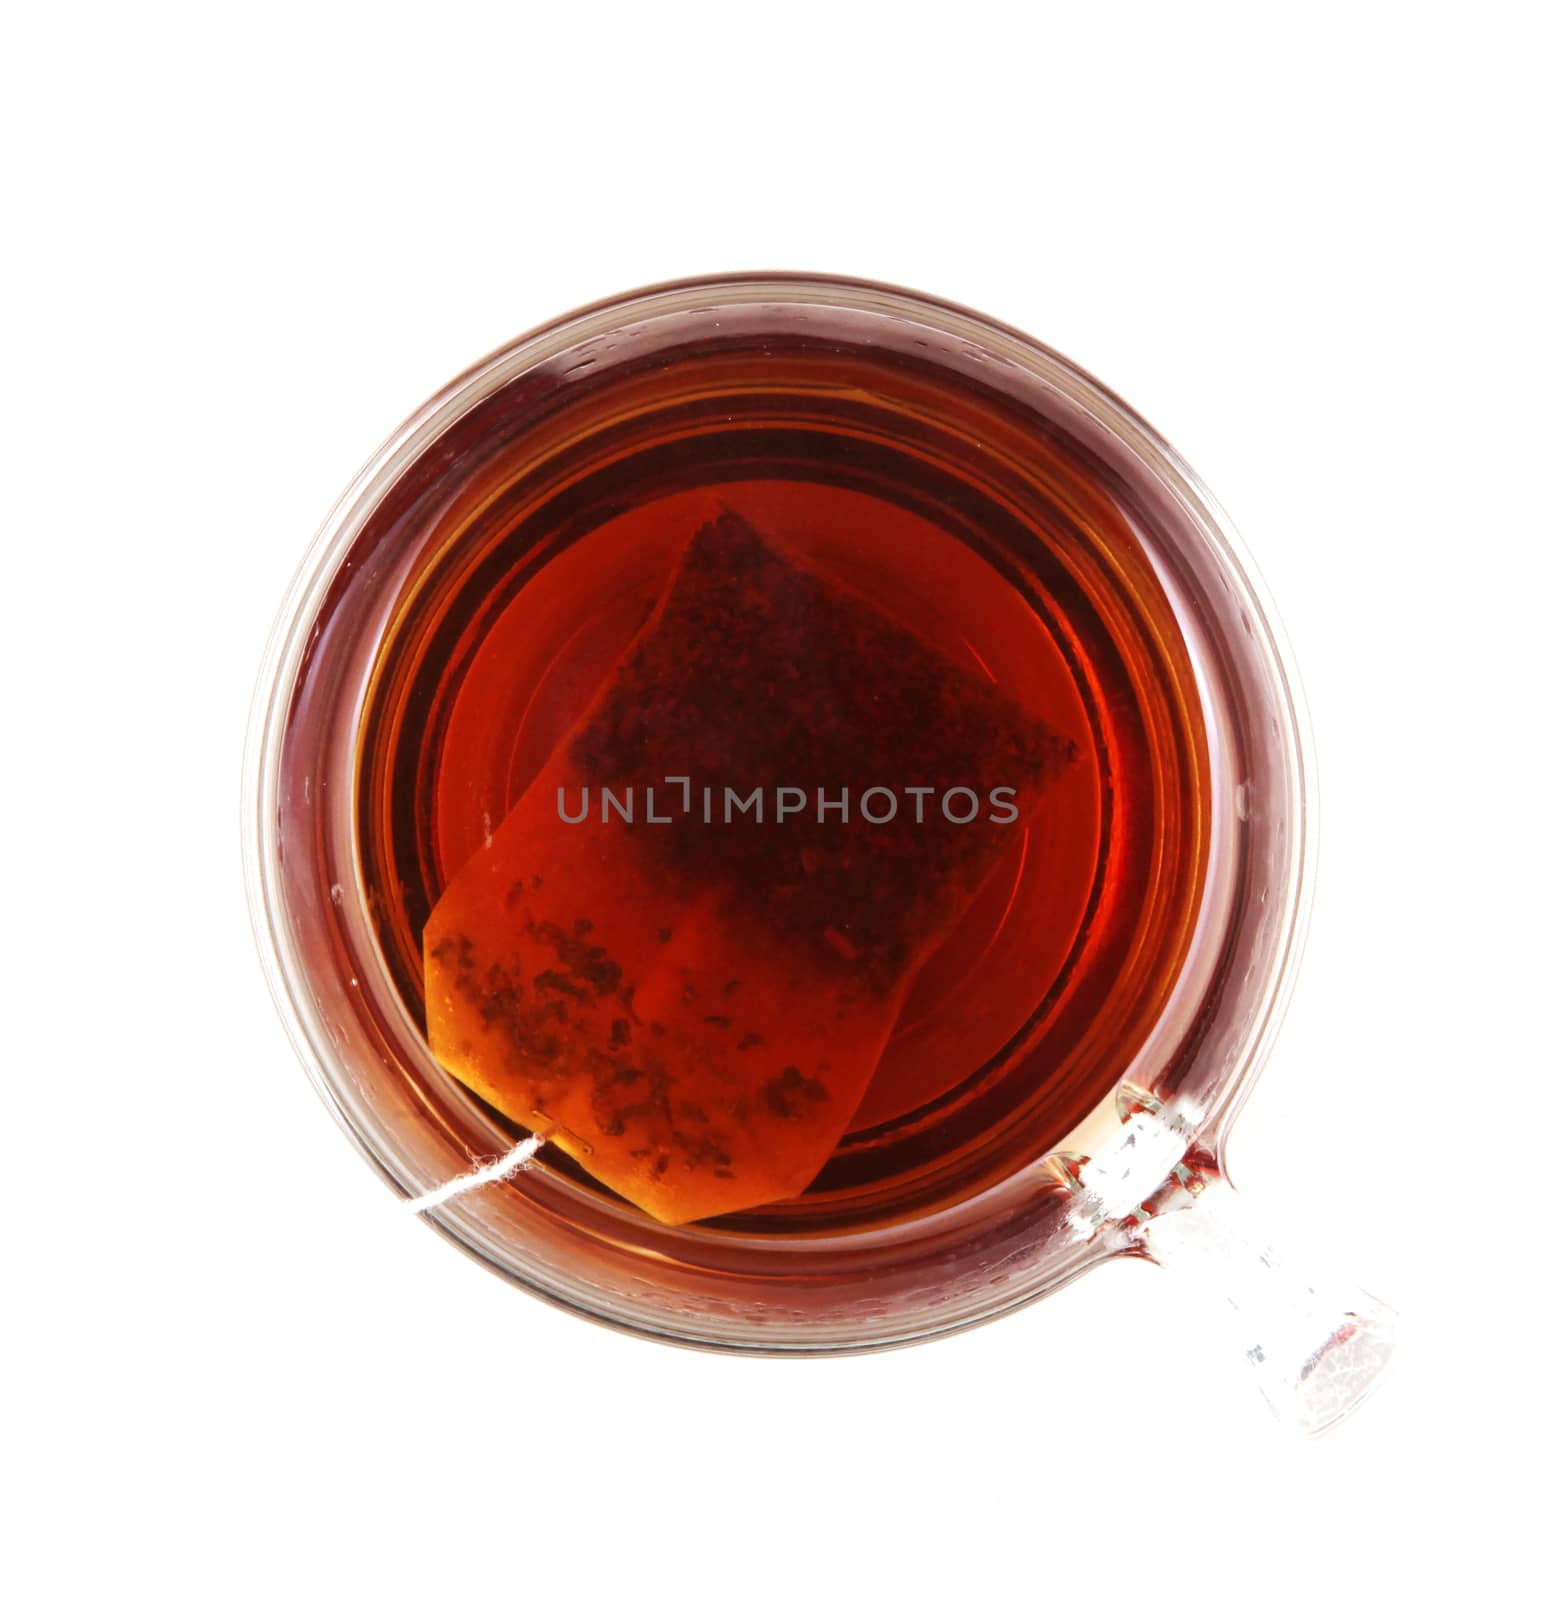 Cup Of Black Tea by nenovbrothers